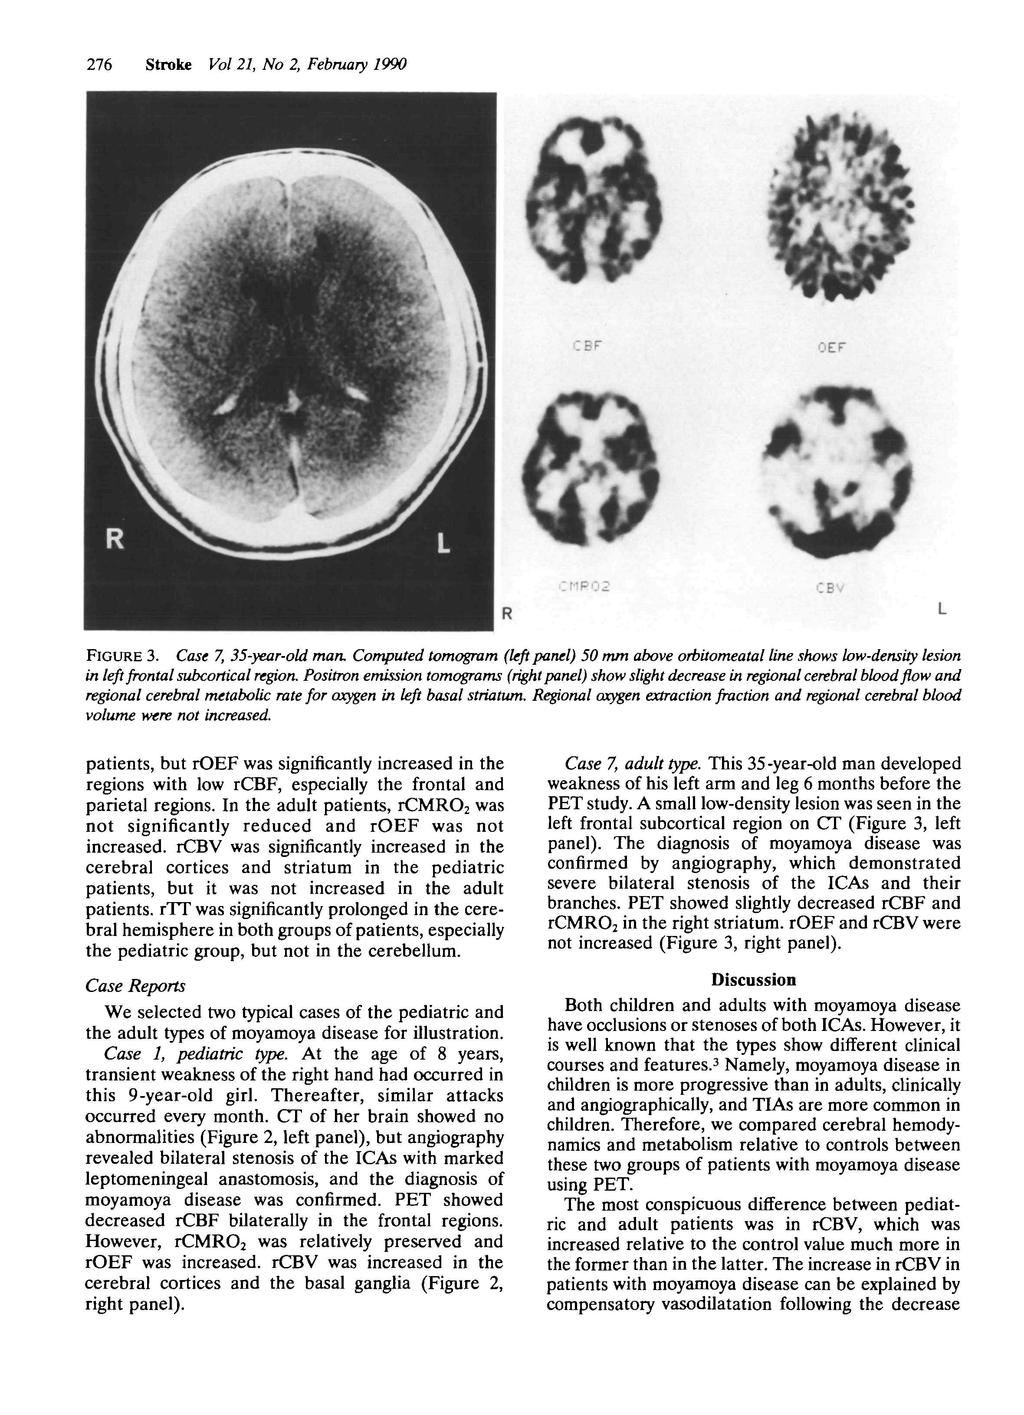 276 Stroke Vol 21, No 2, February 1990 OEF CMPOi FIGURE 3. Case 7, 35-year-old man.